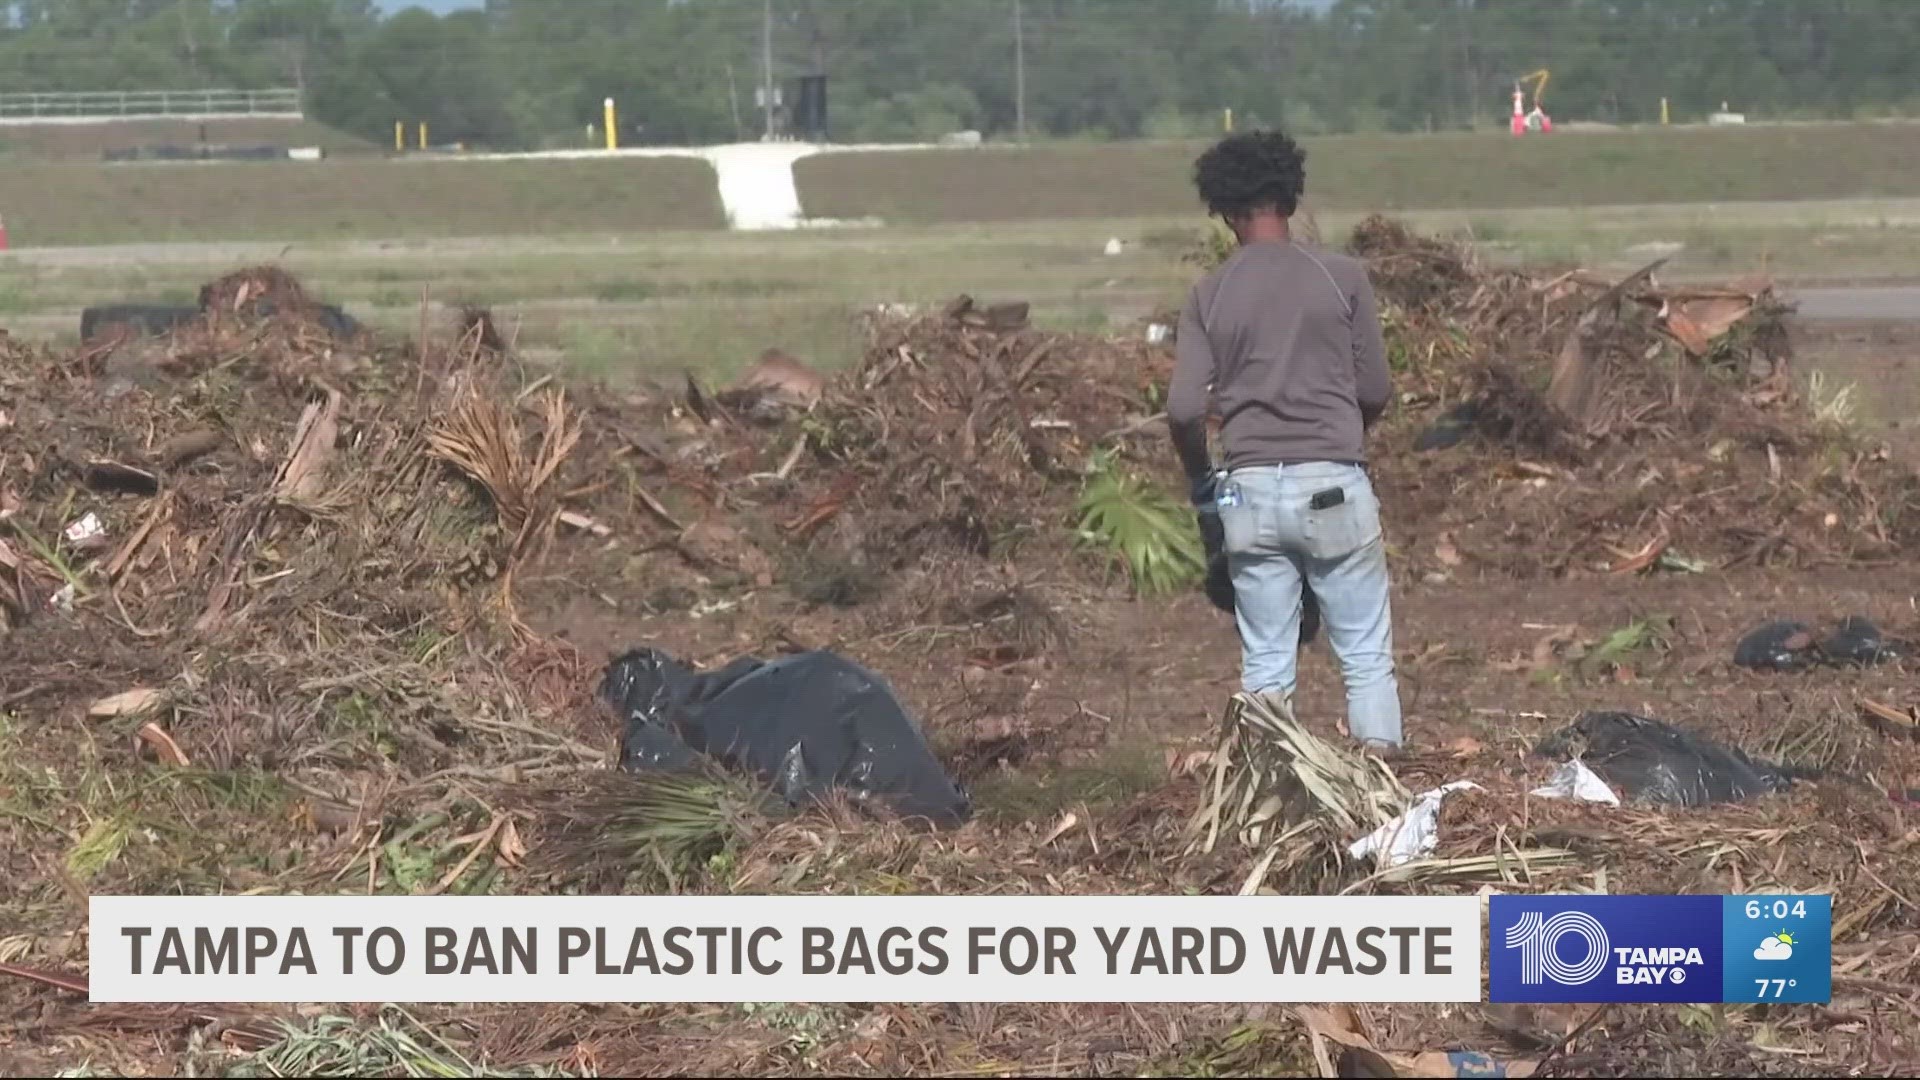 Starting Feb. 1, the city will stop accepting plastic bags of any kind in yard waste collection.